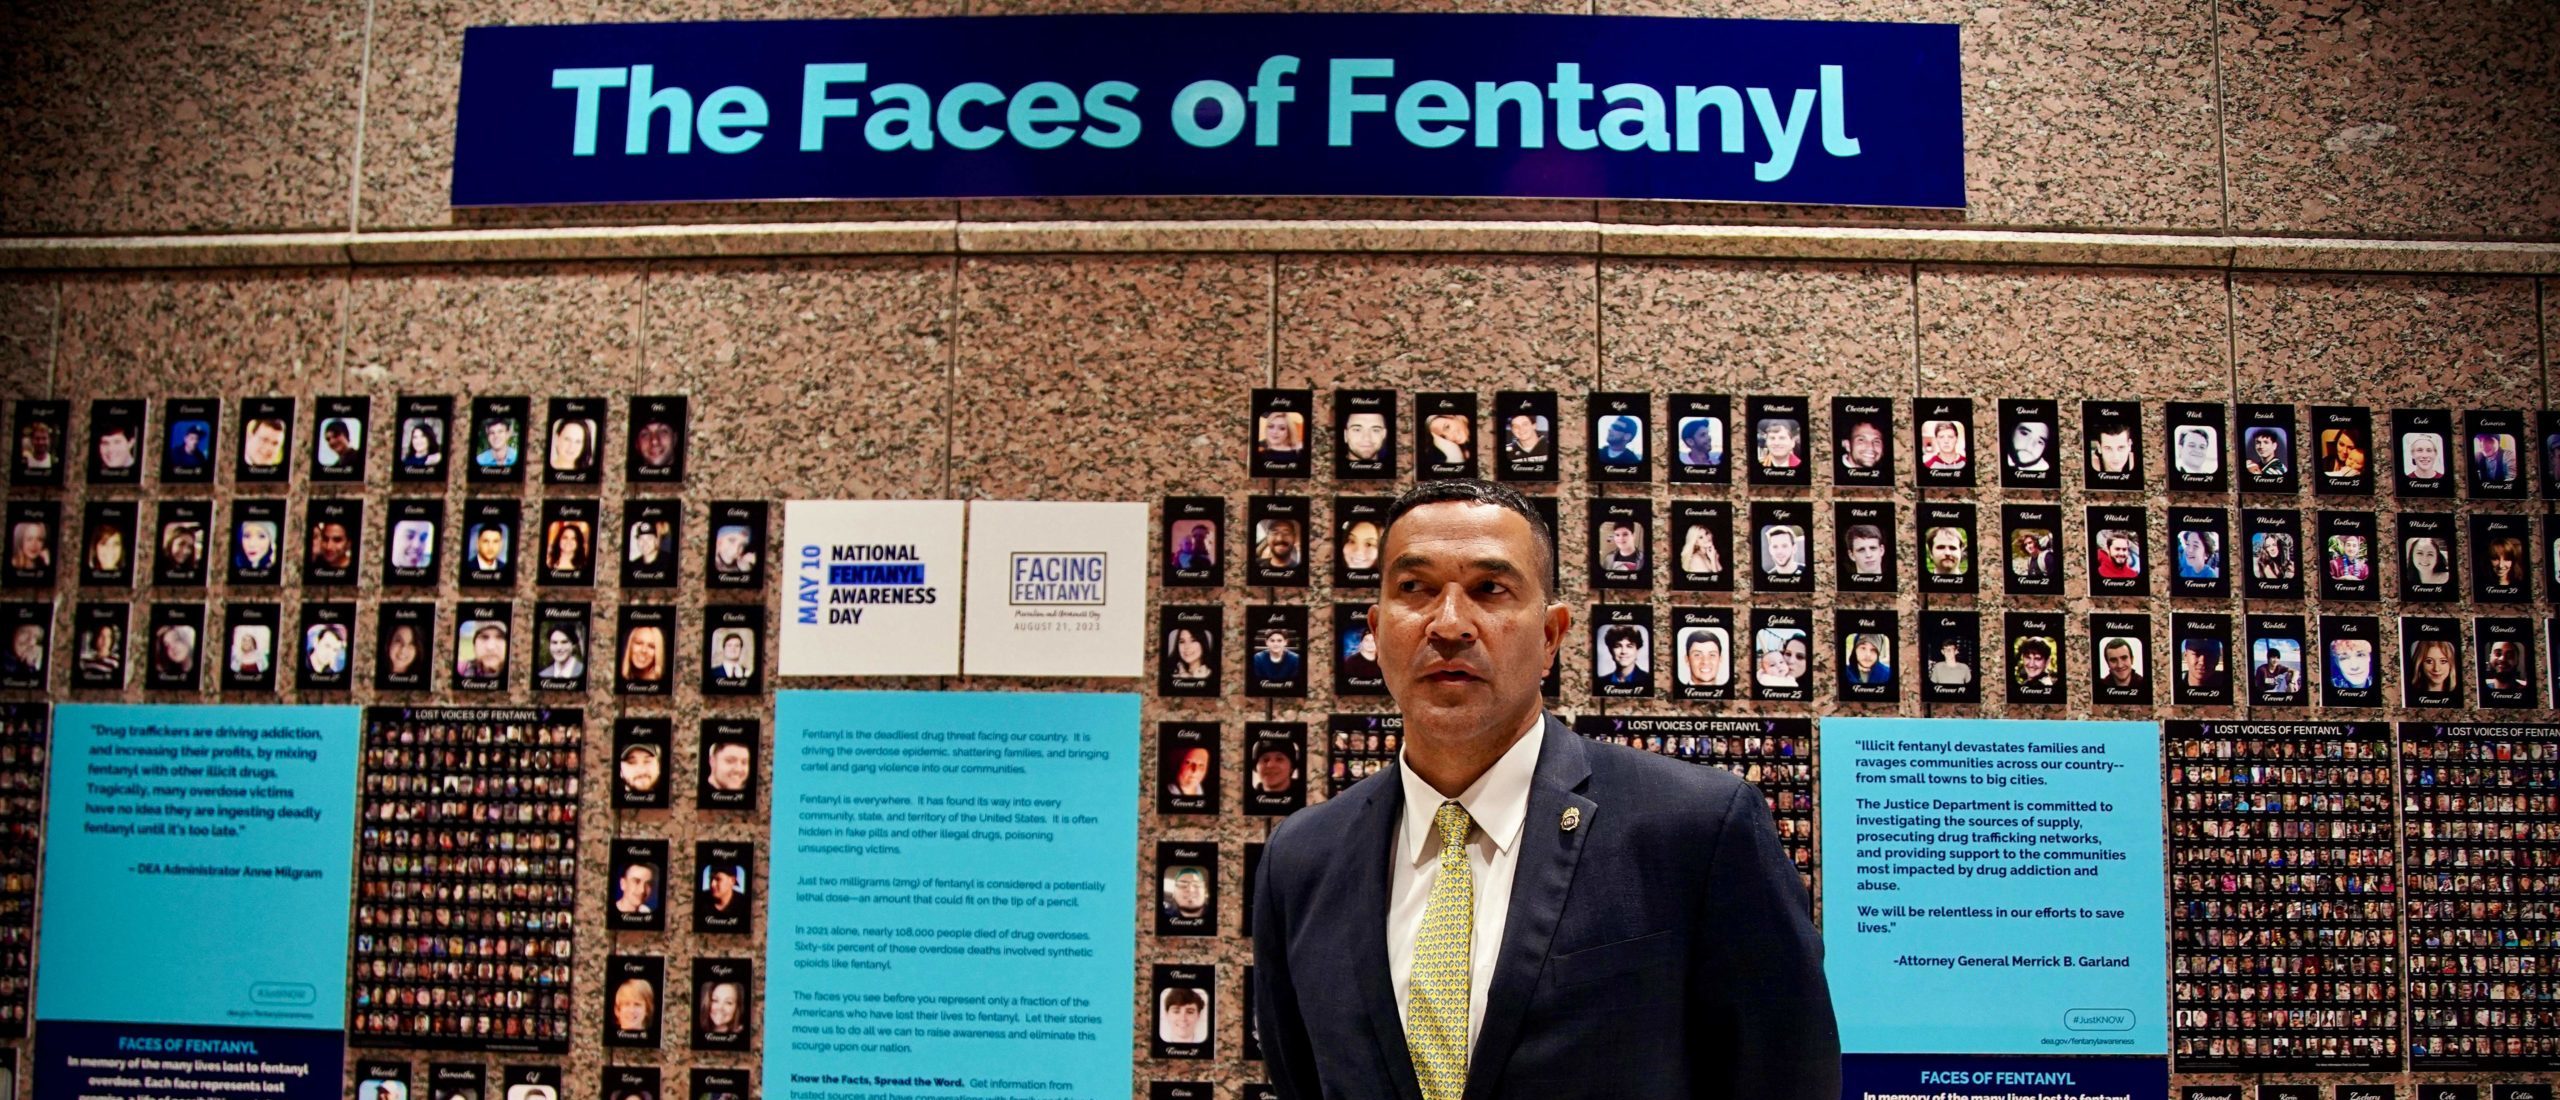 Ray Donovan, Chief of Operations of the Drug Enforcement Administration (DEA), stands in front of "The Faces of Fentanyl" wall, which displays photos of Americans who died of a fentanyl overdose, at the DEA headquarters in Arlington, Virginia, on July 13, 2022. - America's opioid crisis has reached catastrophic proportions, with over 80,000 people dying of opioid overdoses last year, most of them due to illicit synthetics such as fentanyl -- more than seven times the number a decade ago. "This is the most dangerous epidemic that weve seen," said Ray Donovan, chief of operations at the US Drug Enforcement Agency (DEA). "Fentanyl is not like any other illicit narcotic, its that deadly instantaneously." (Photo by Agnes BUN / AFP) (Photo by AGNES BUN/AFP via Getty Images)